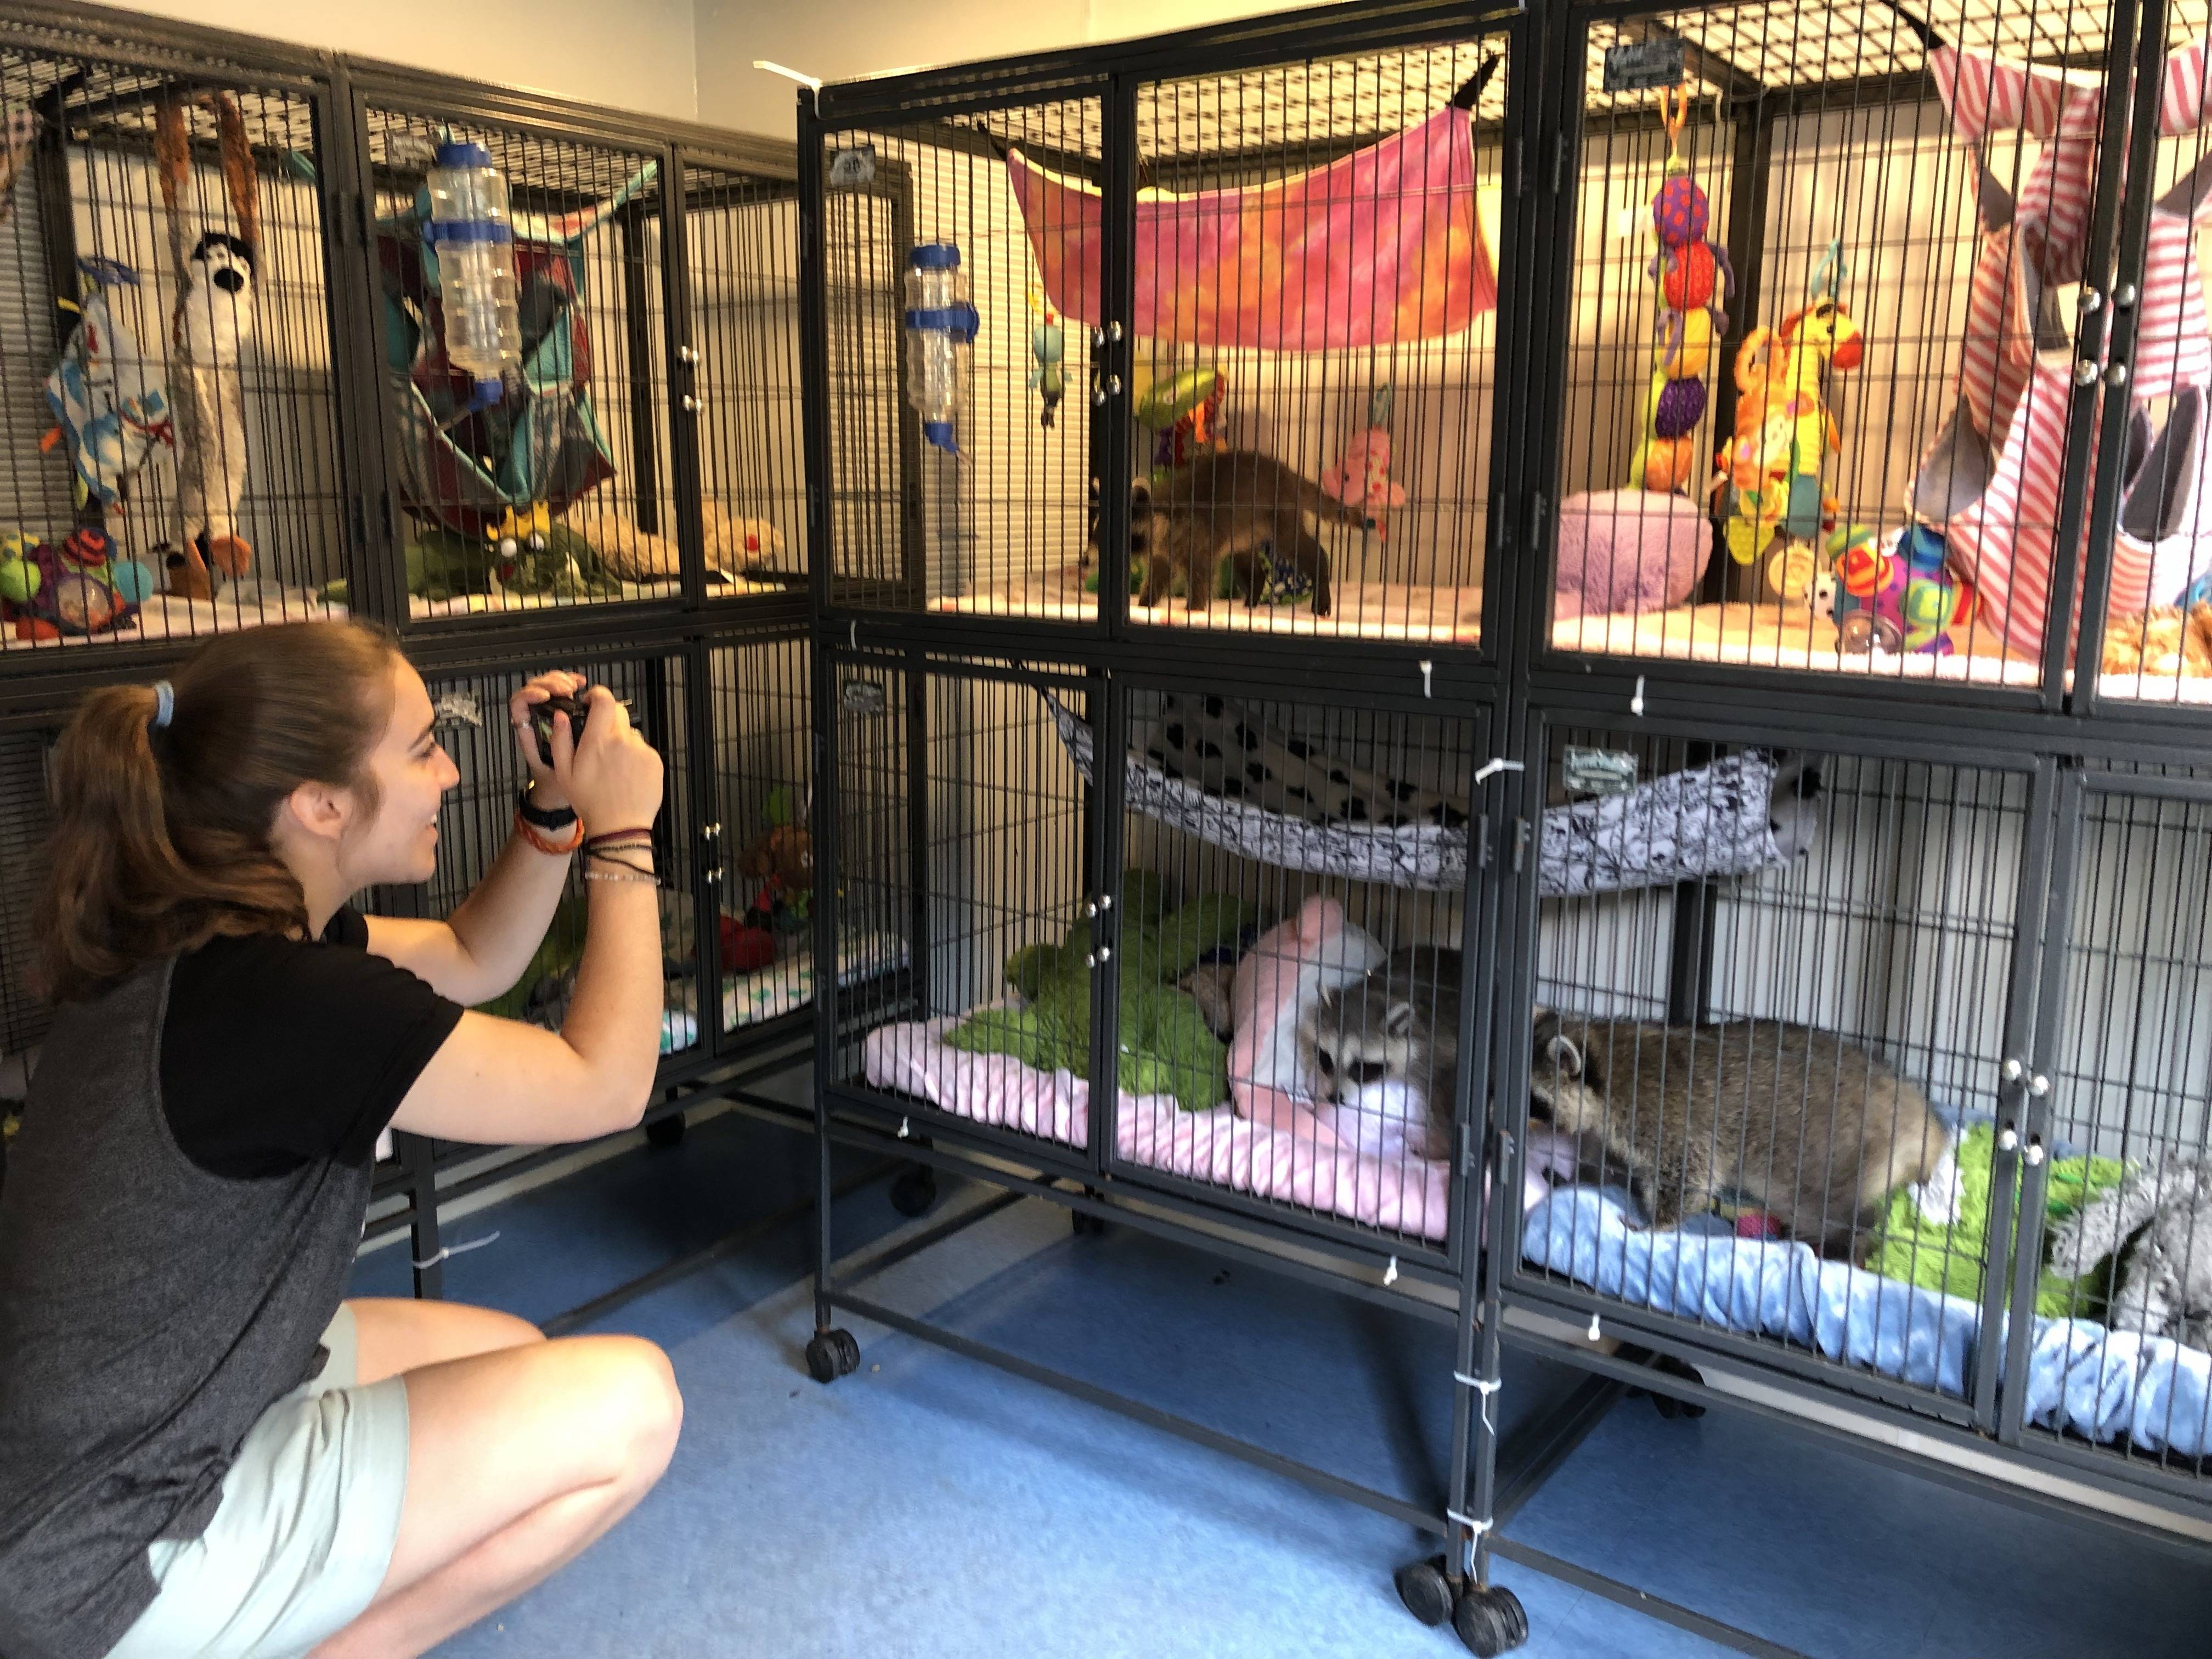 Becca kneels in front of several cages of rehabilitated raccoons to take a photo